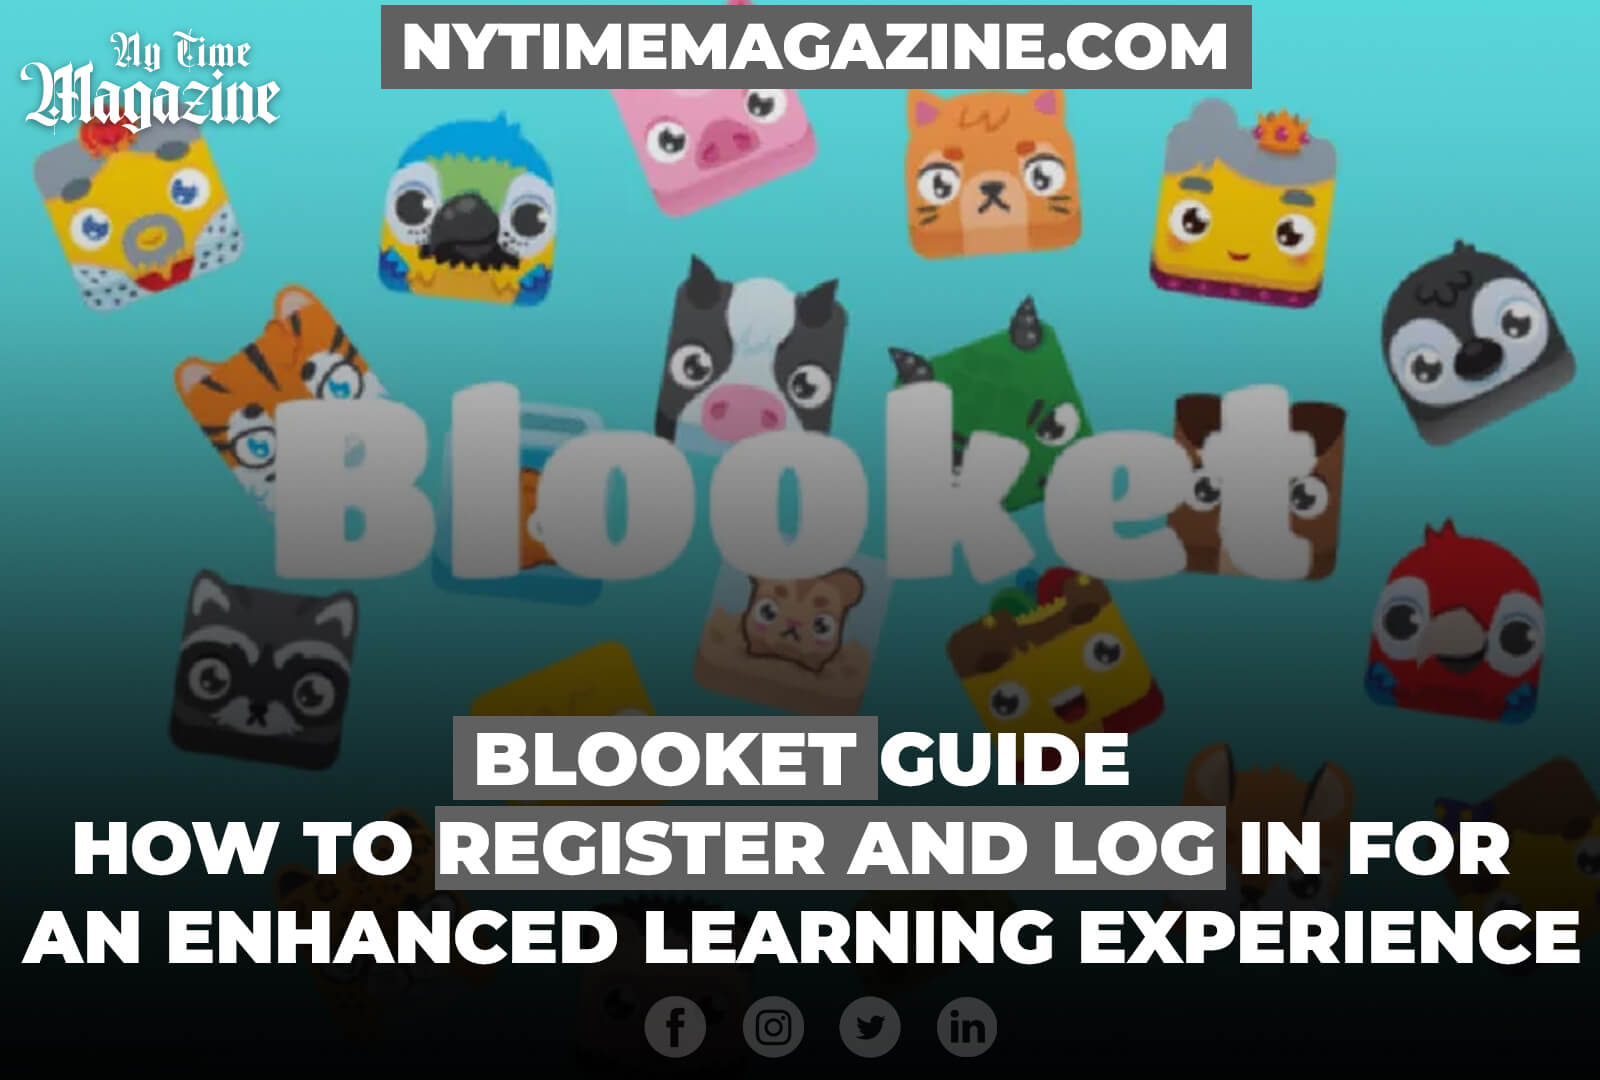 BLOOKET GUIDE: HOW TO REGISTER AND LOG IN FOR AN ENHANCED LEARNING EXPERIENCE